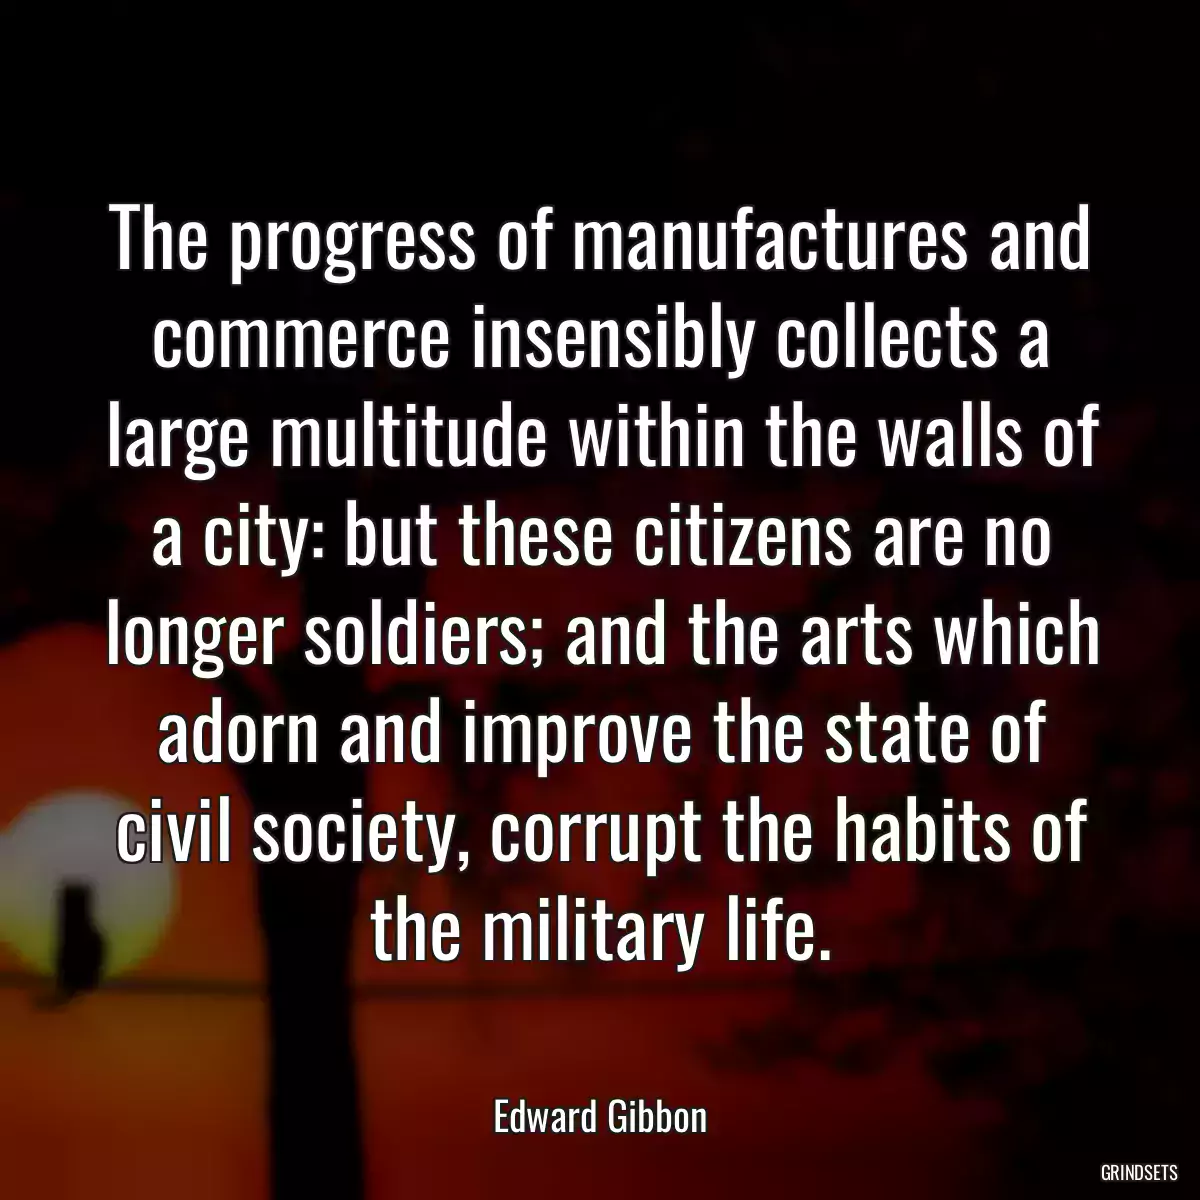 The progress of manufactures and commerce insensibly collects a large multitude within the walls of a city: but these citizens are no longer soldiers; and the arts which adorn and improve the state of civil society, corrupt the habits of the military life.